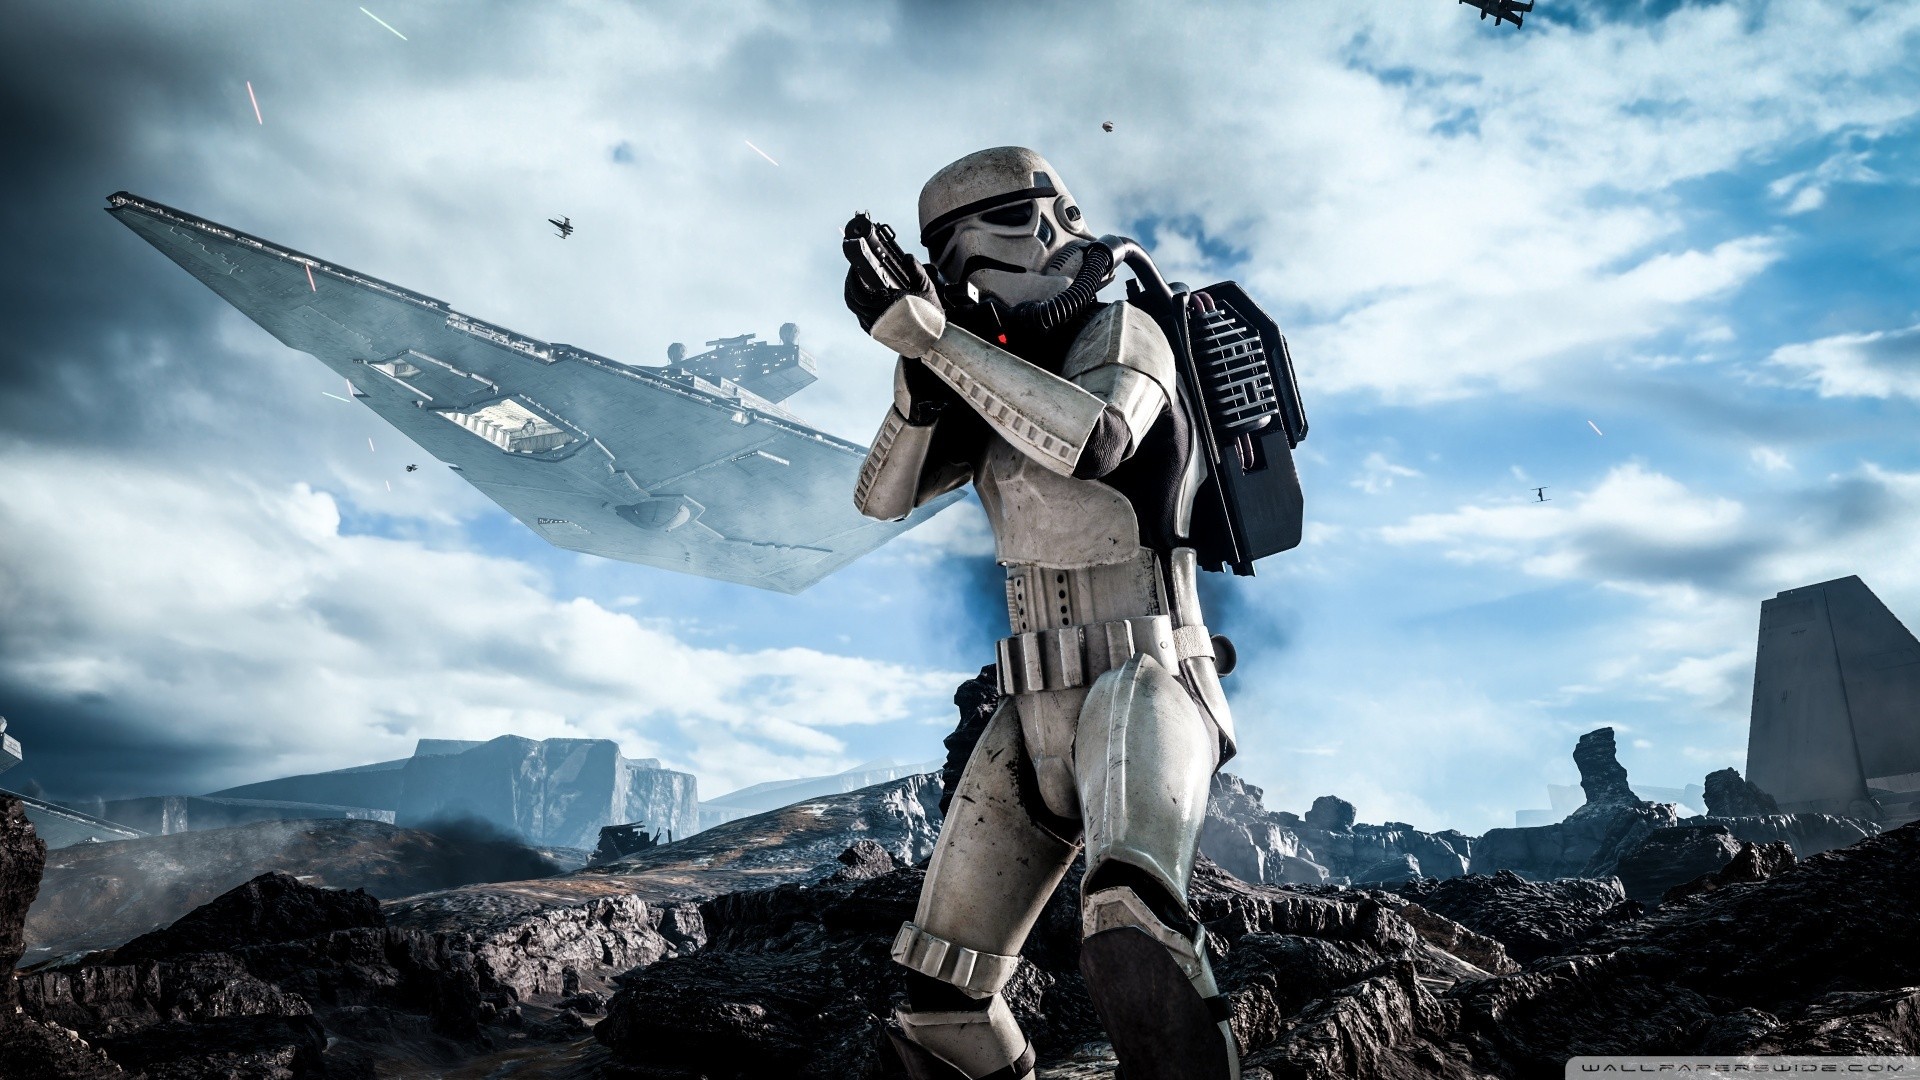 Star Wars Storm Troopers CGi Star Destroyer Star Wars Ships Imperial Forces Blaster 1920x1080